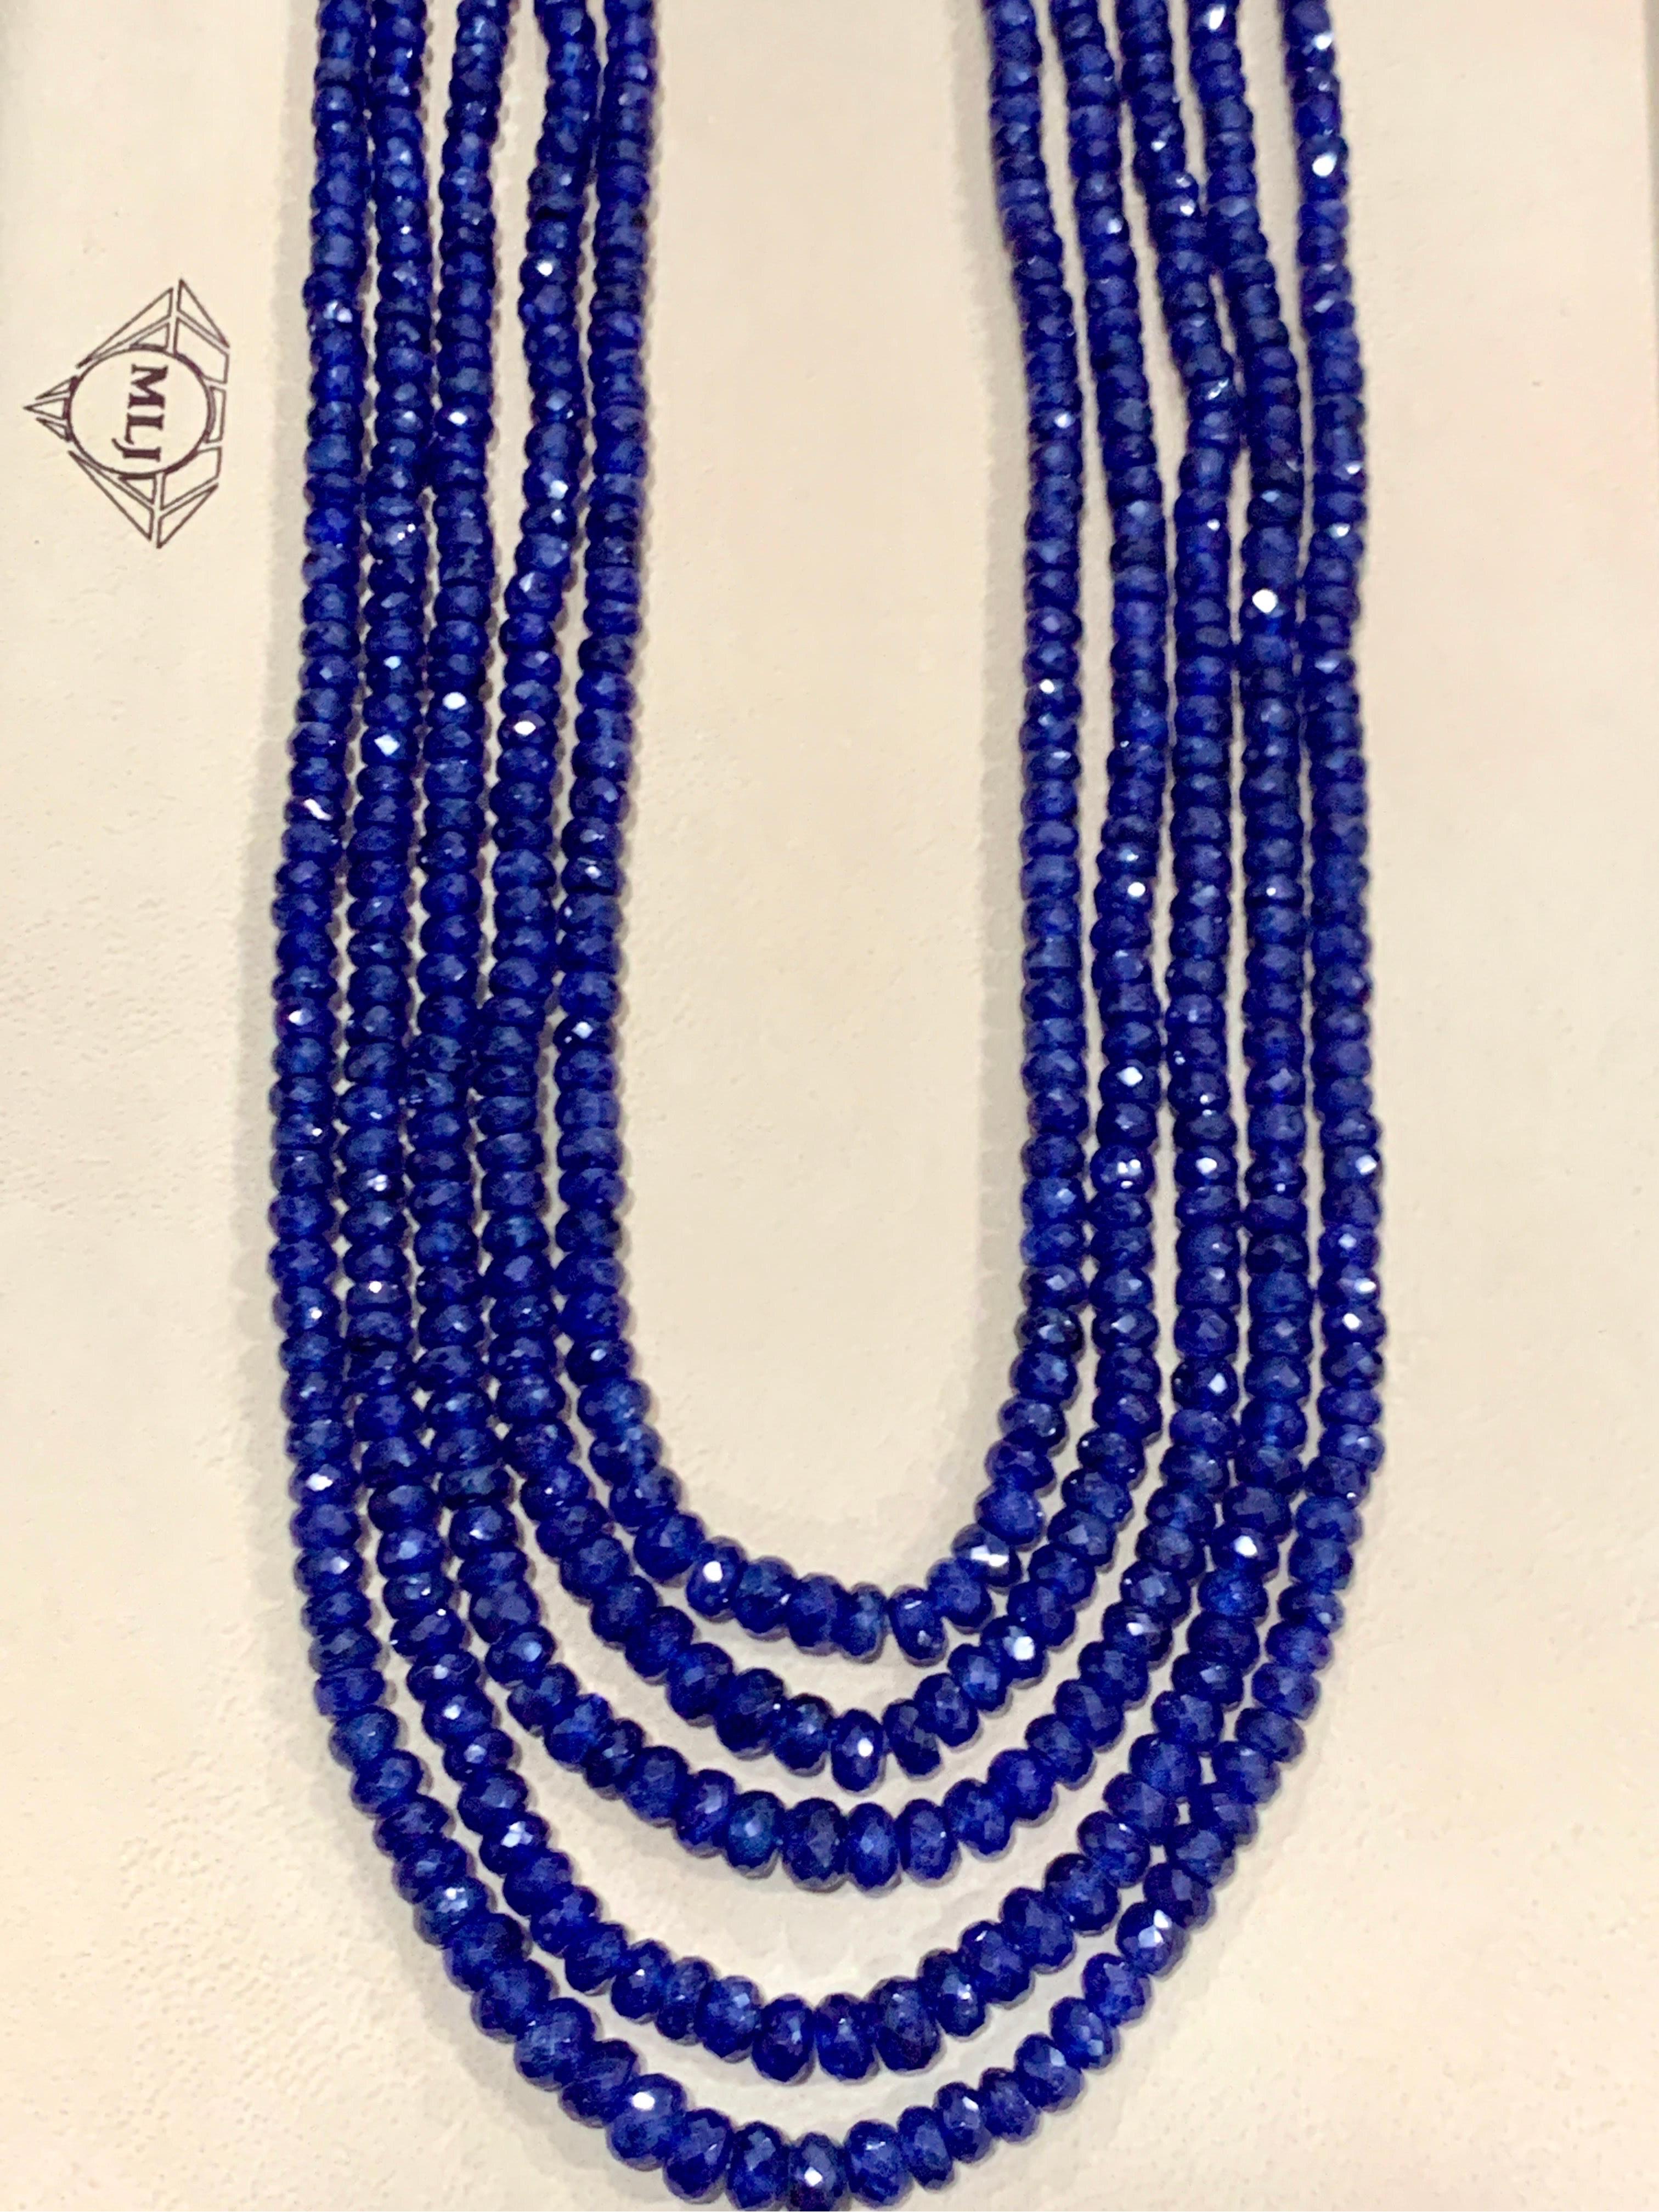 Faceted 980 Carat Natural Tanzanite Bead Five-Strand Necklace 14 Karat Gold In Excellent Condition For Sale In New York, NY